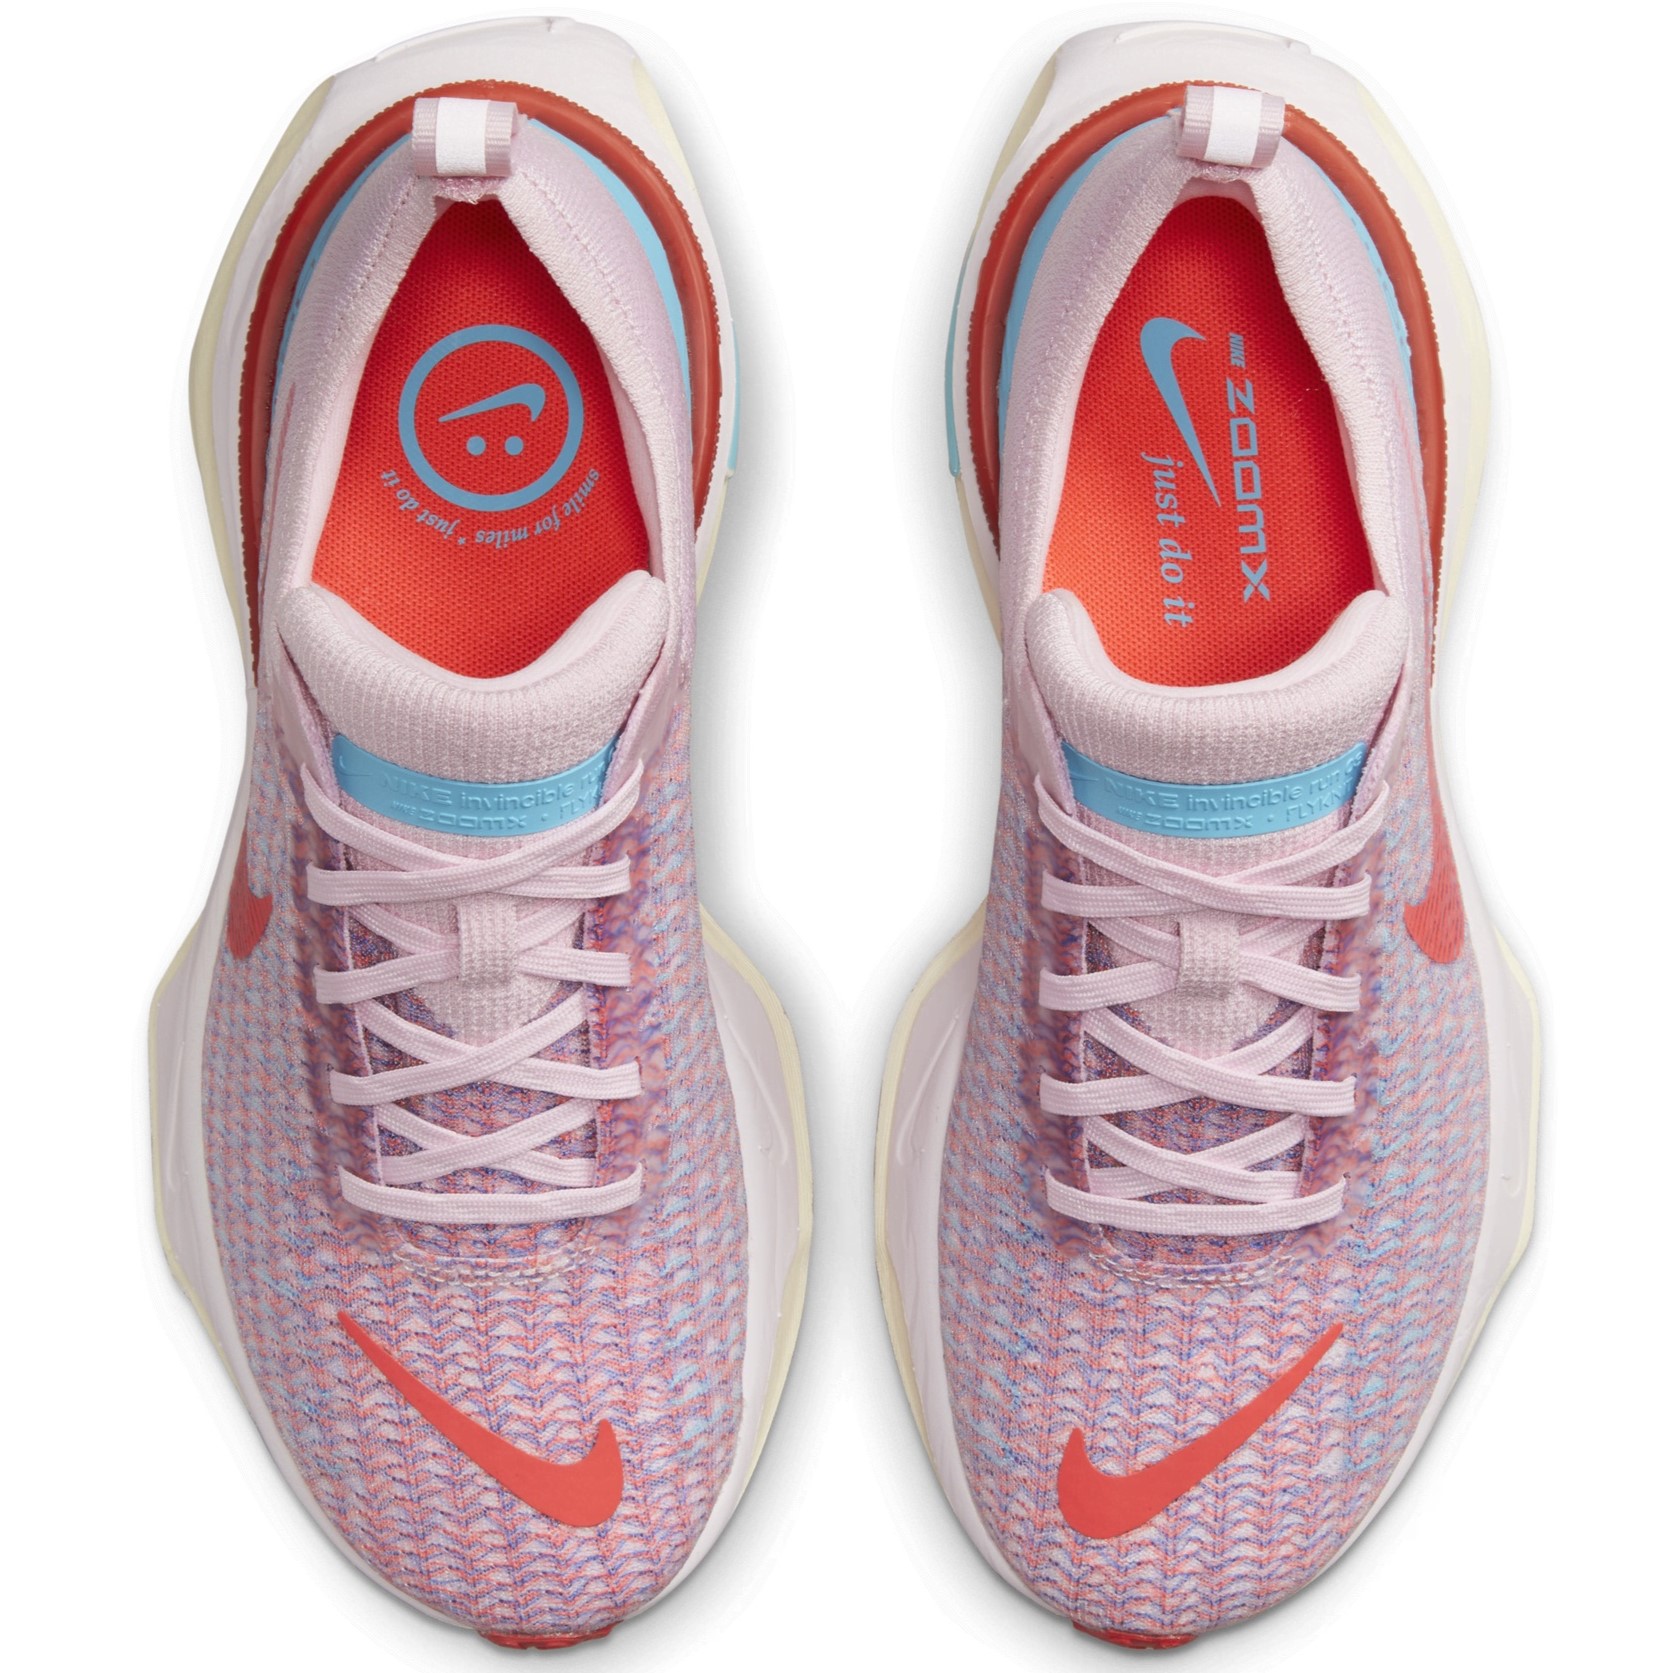 GIÀY NIKE NỮ WOMENS ZOOMX INVINCIBLE 3 ROAD RUNNING SHOES PINK FOAM RACER BLUE DR2660-600 8